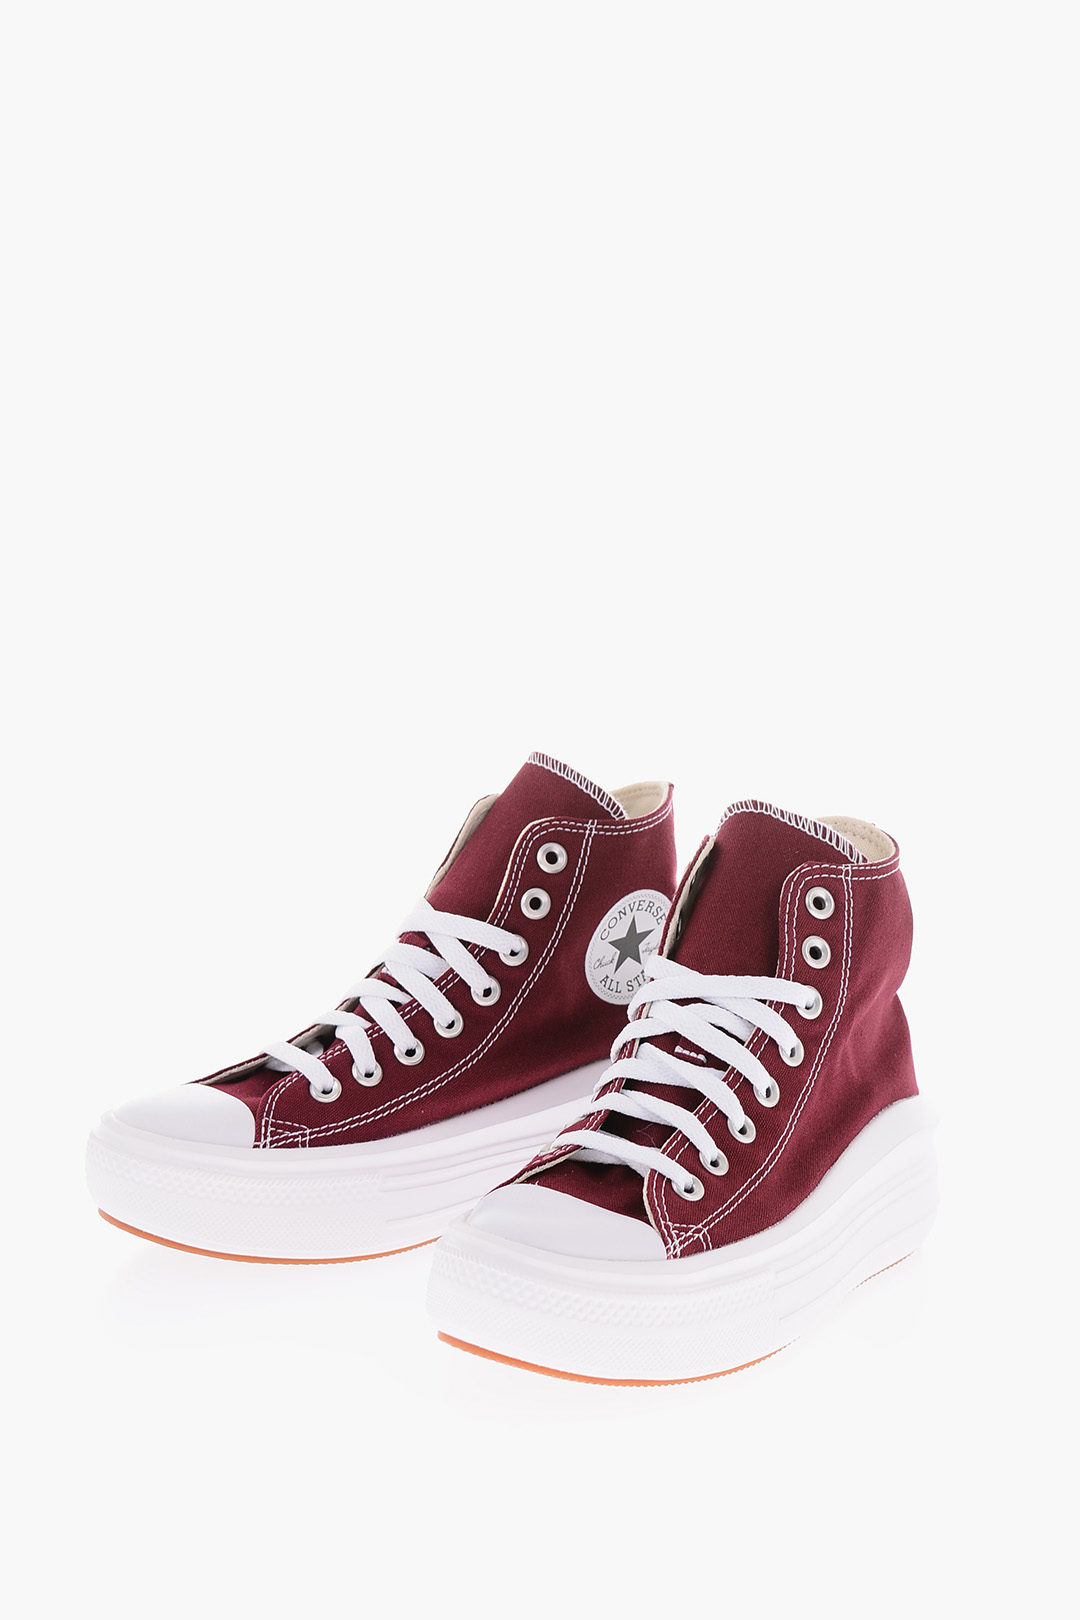 Converse ALL STAR CHUCK TAYLOR Cotton Top Sneakers with women - Glamood Outlet